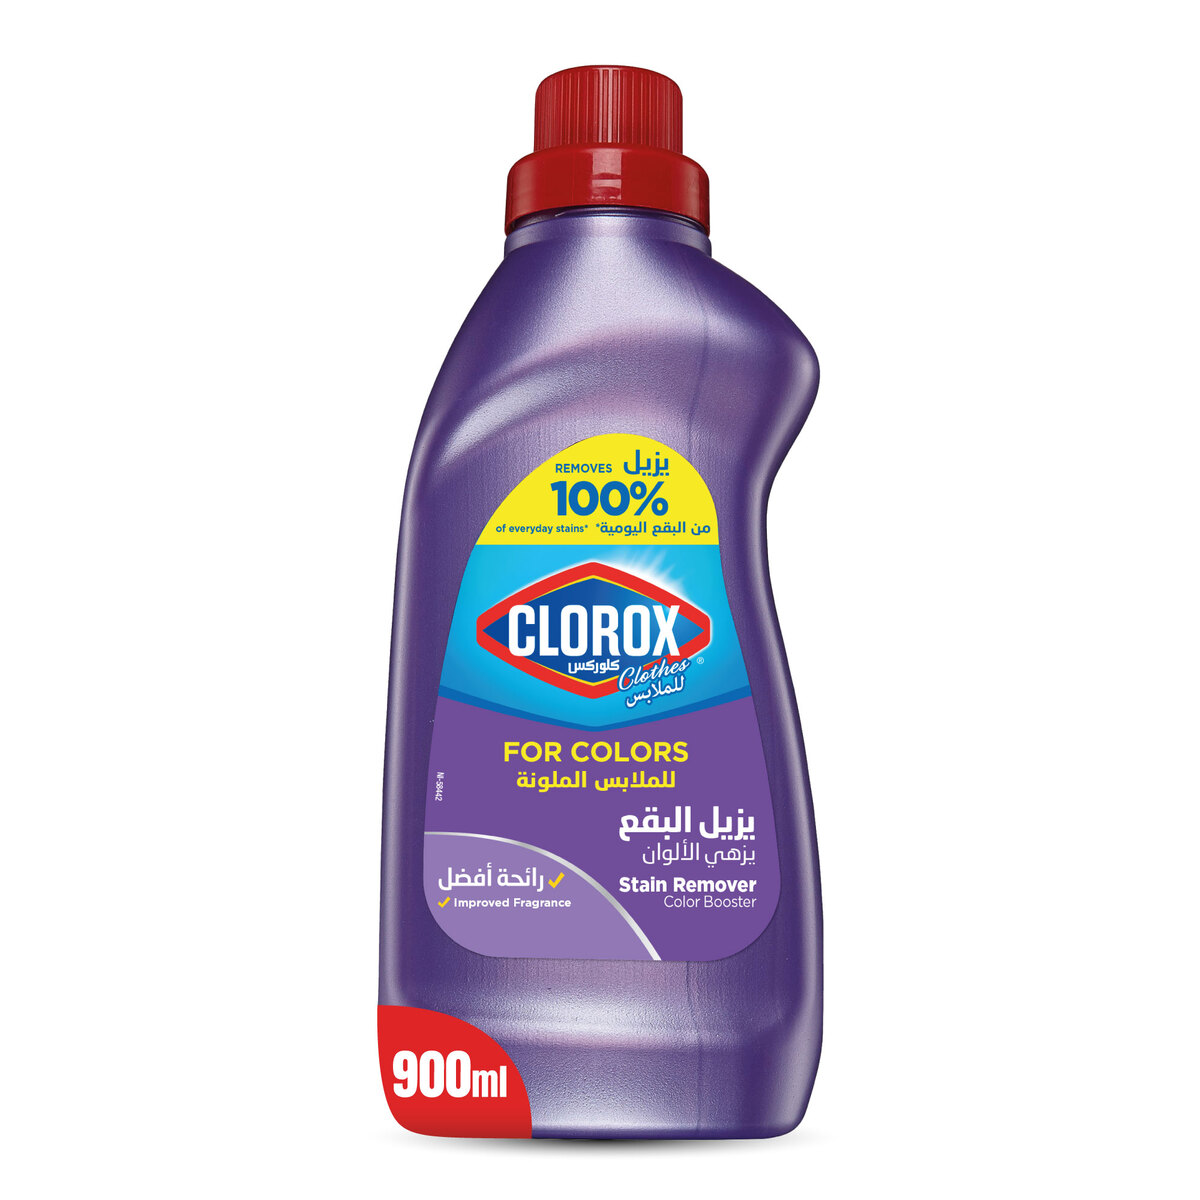 Clorox Liquid Stain Remover & Color Booster For Colored Clothes 900 ml